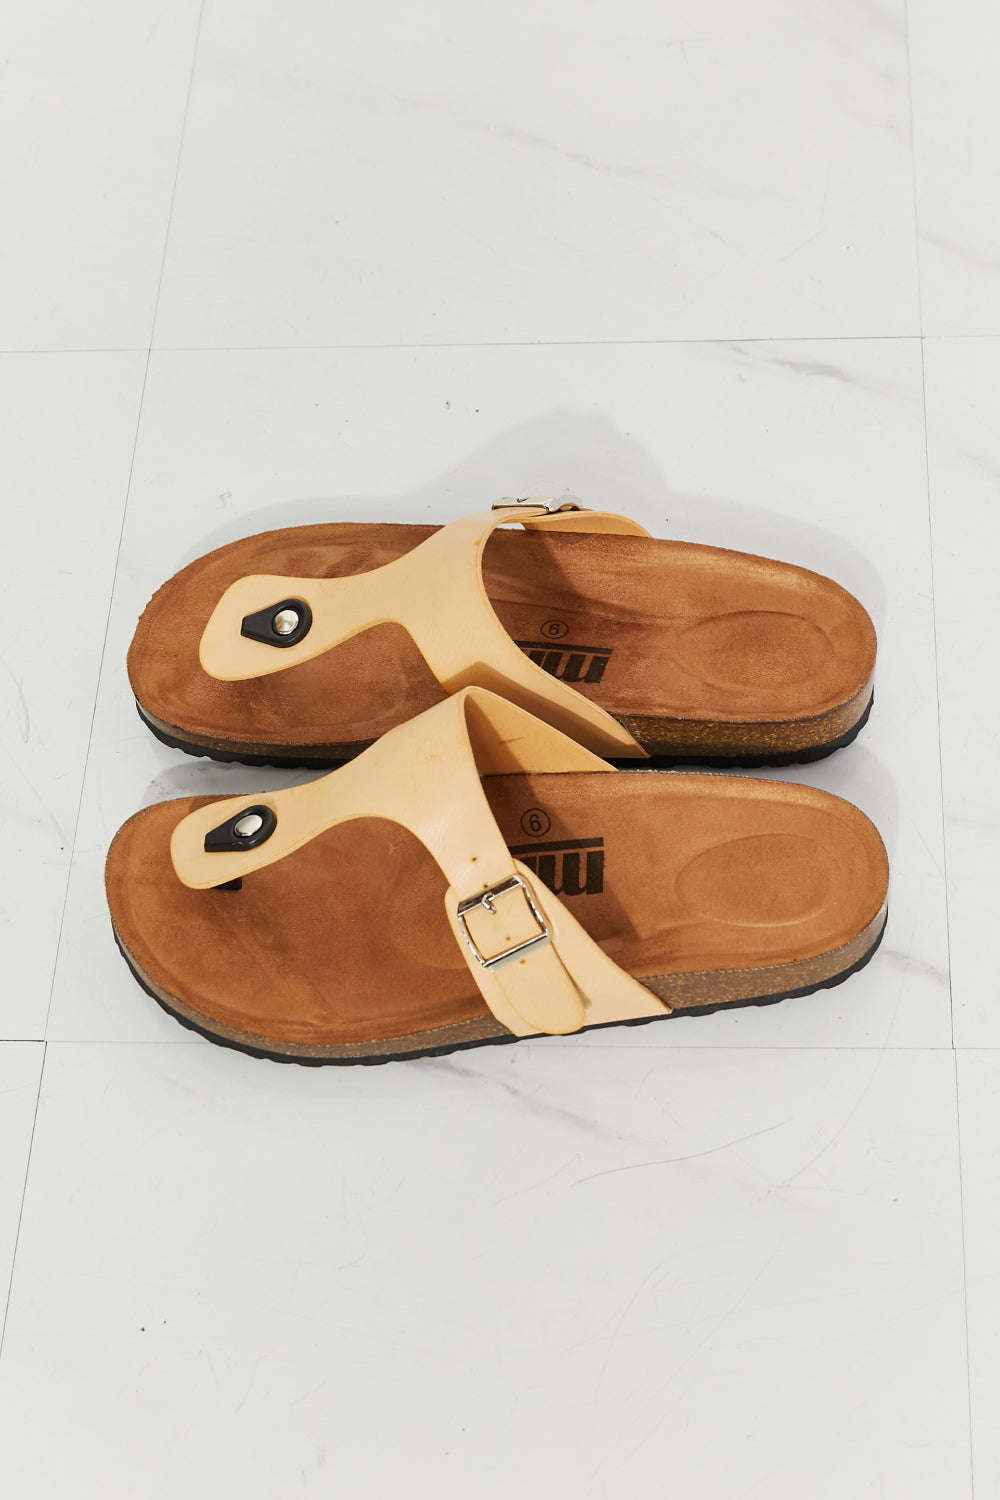 Drift Away T-Strap Flip-Flop in Sand  Southern Soul Collectives 